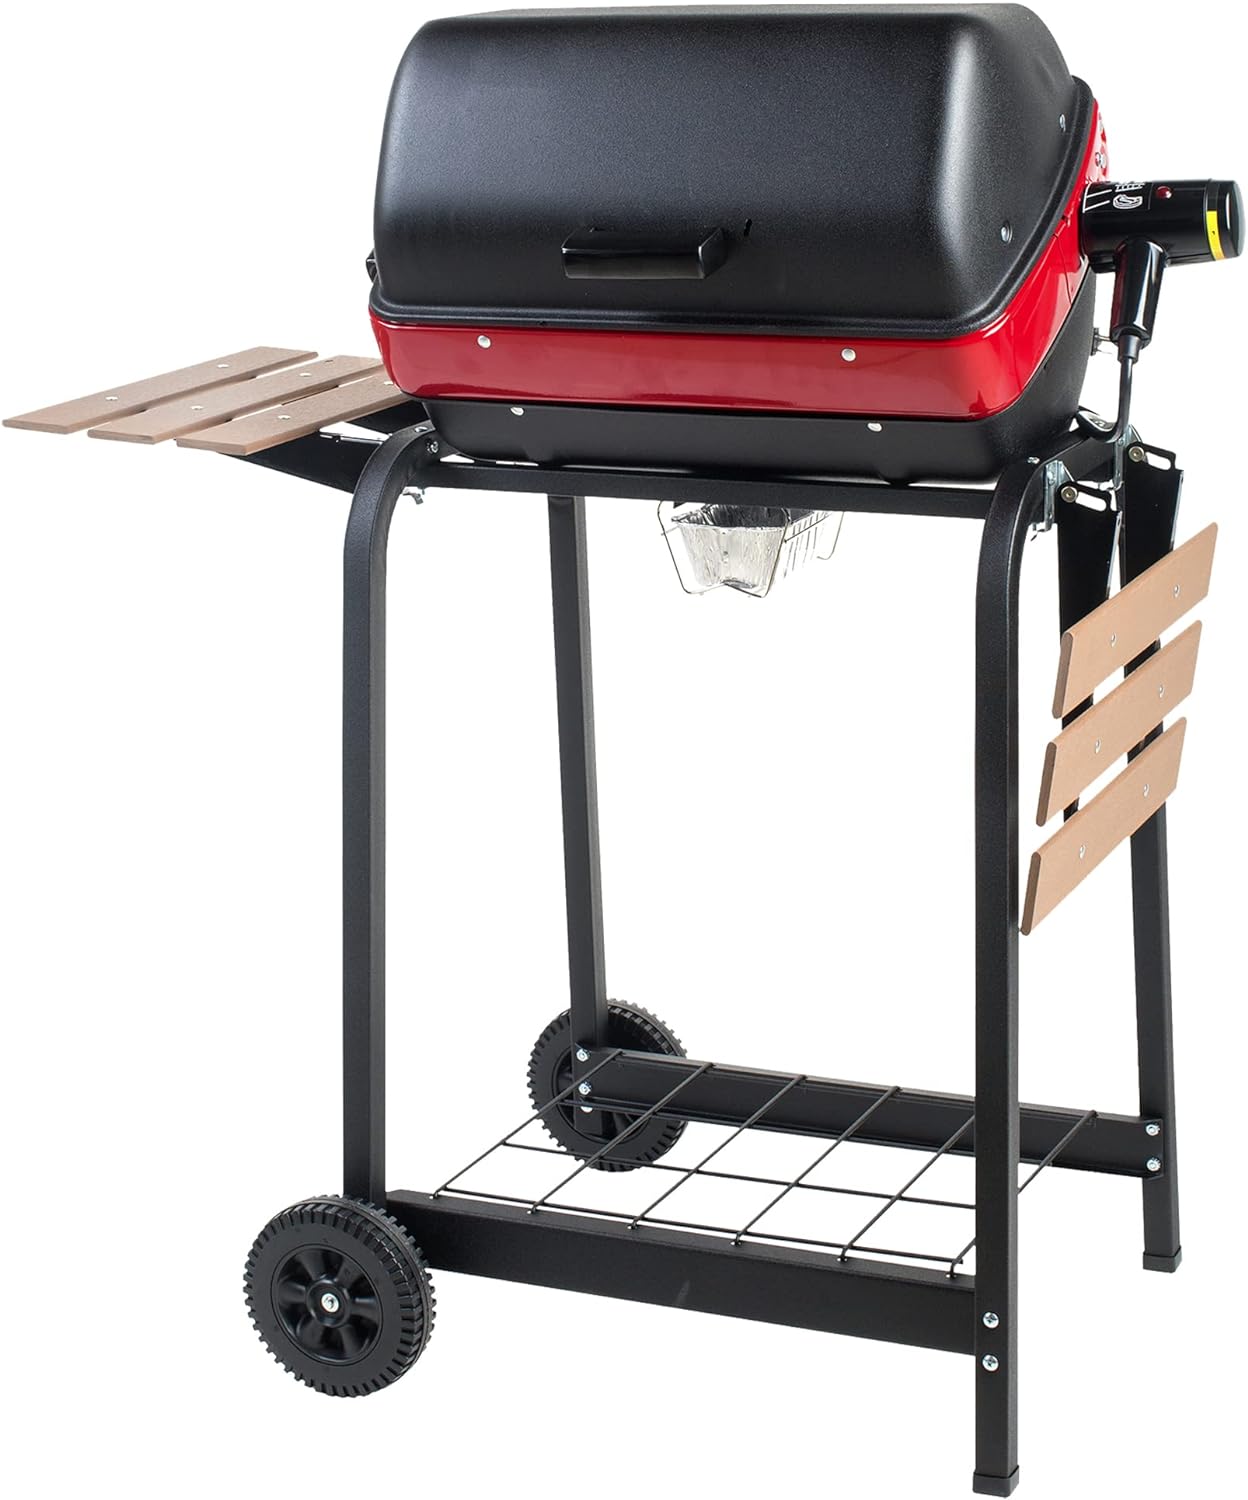 Americana Electric Cart Grill with Side Tables - Americana Electric Cart Grill Review